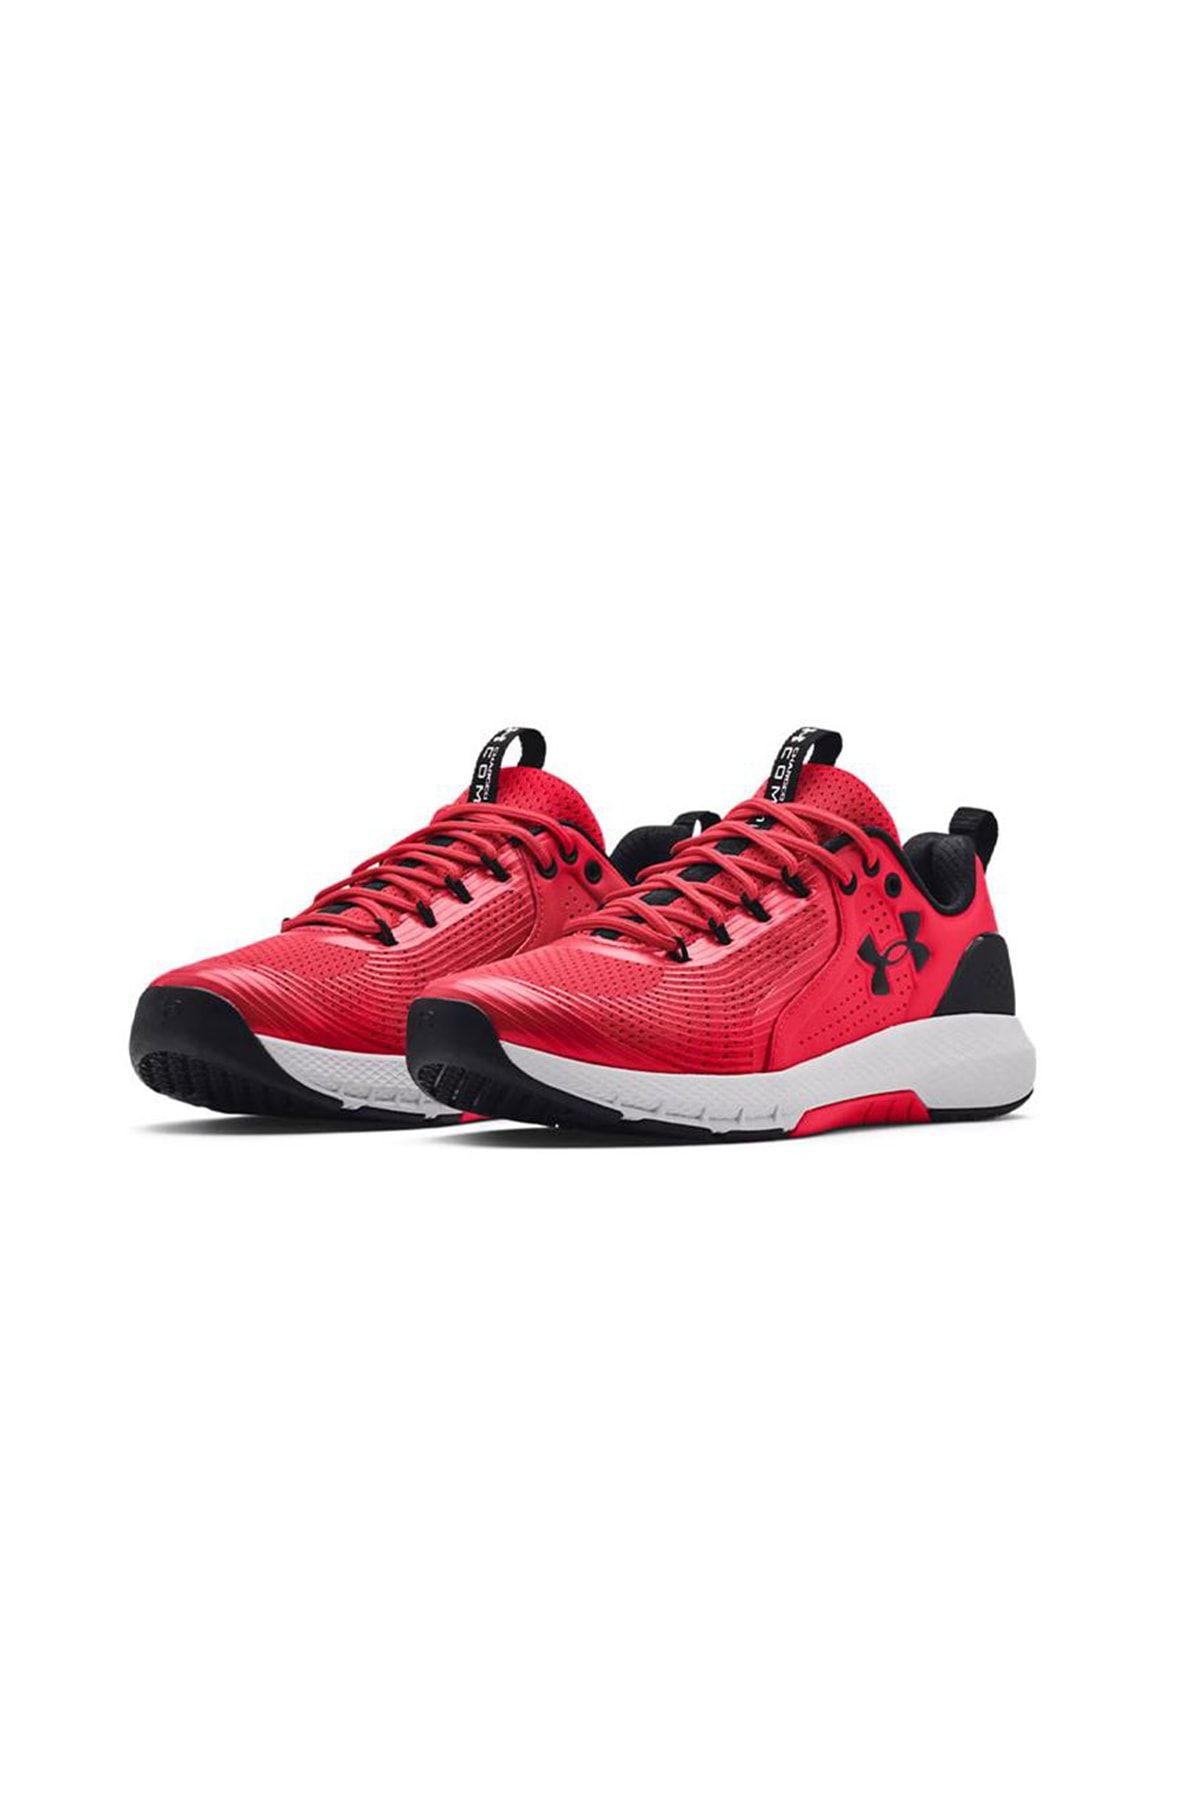 Under Armour Ua Charged Commit Tr 3 3023703-600